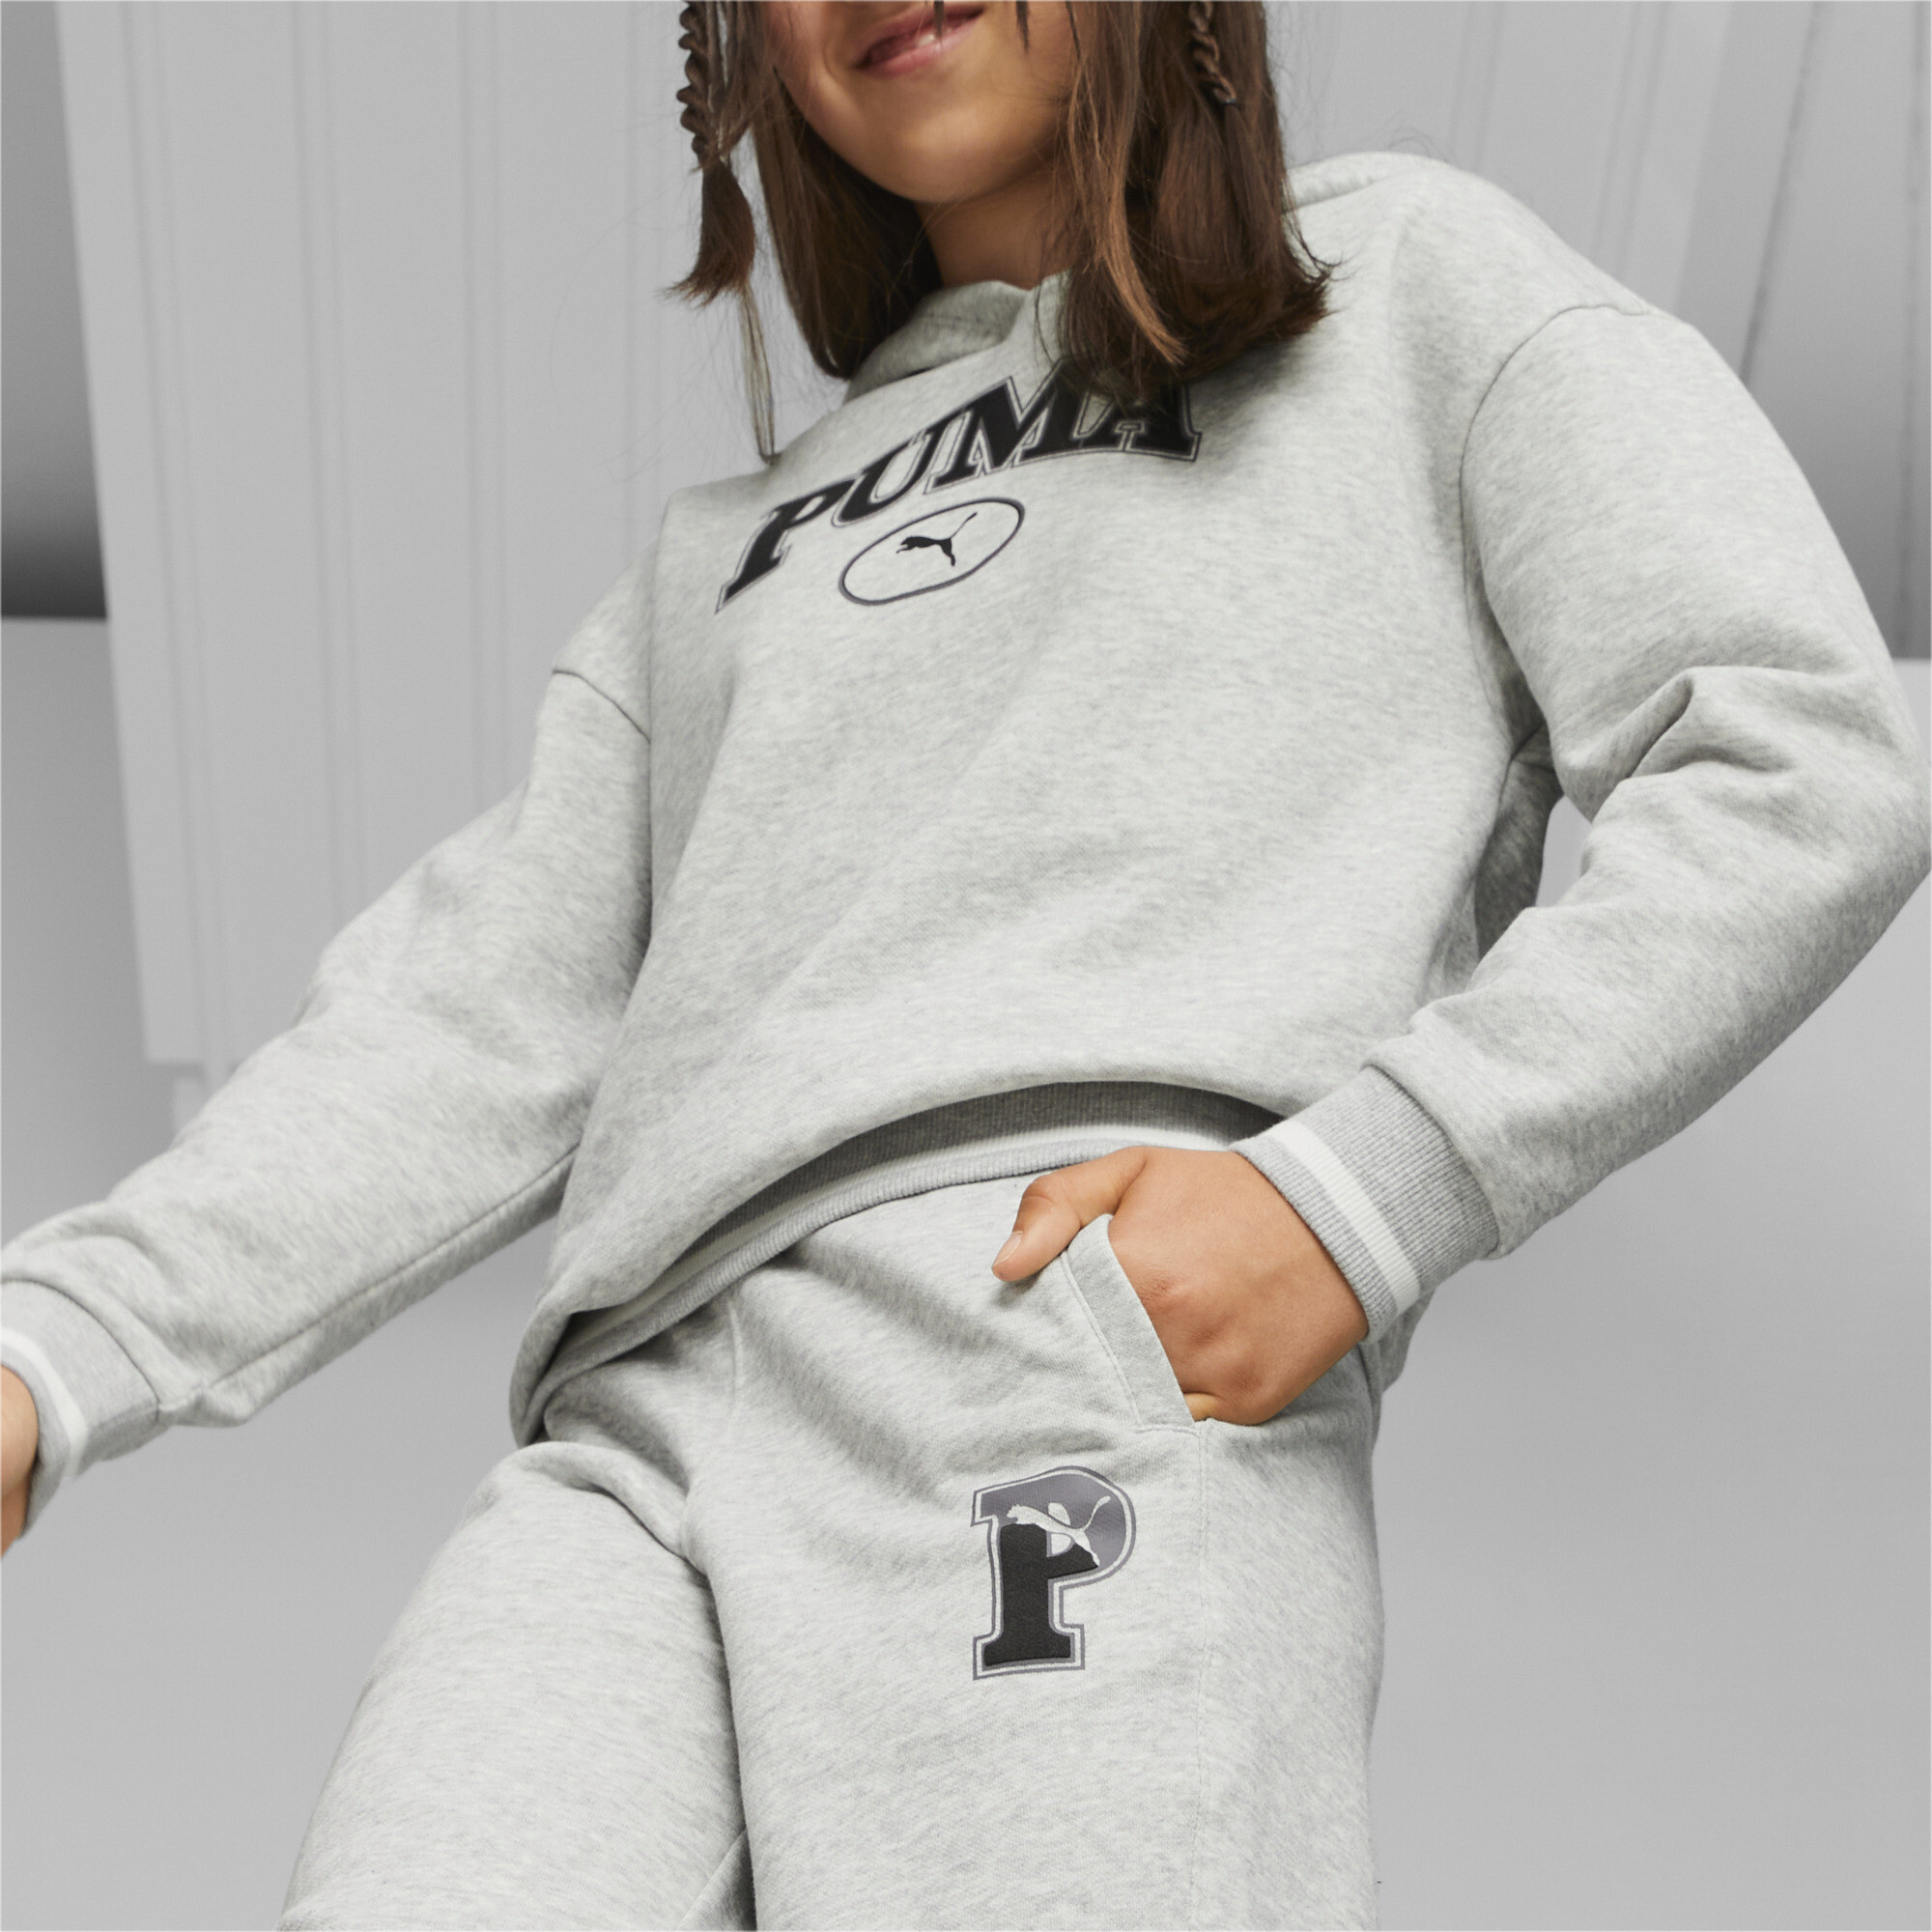 PUMA SQUAD Sweatpants In Heather, Size 11-12 Youth